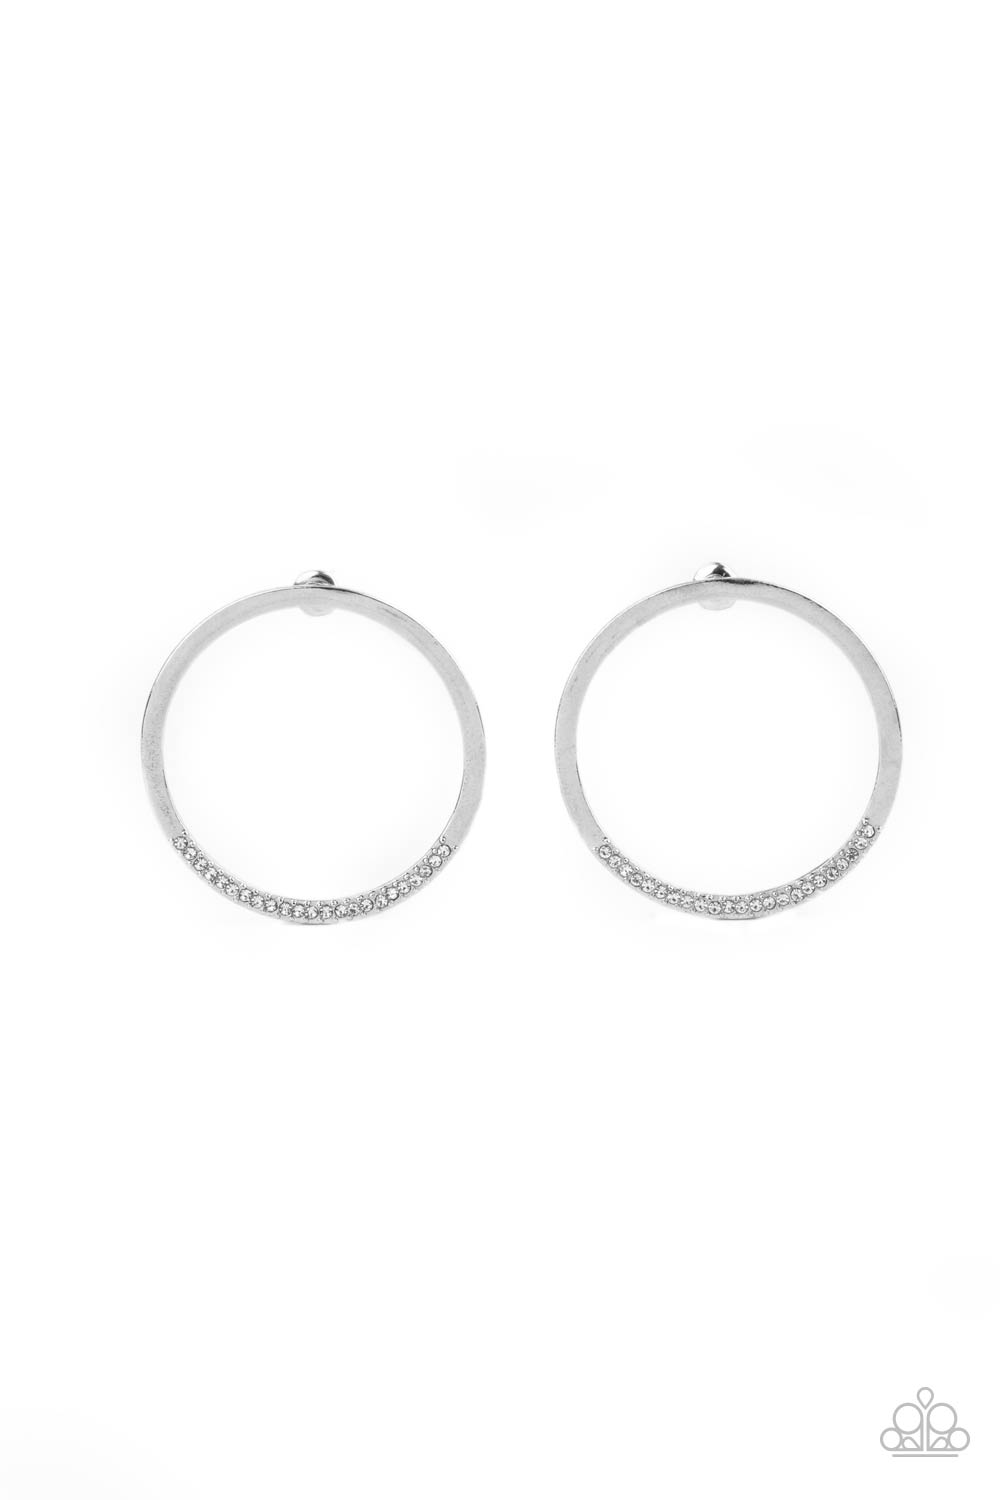 Paparazzi Accessories Spot On Opulence - White Earrings - Lady T Accessories